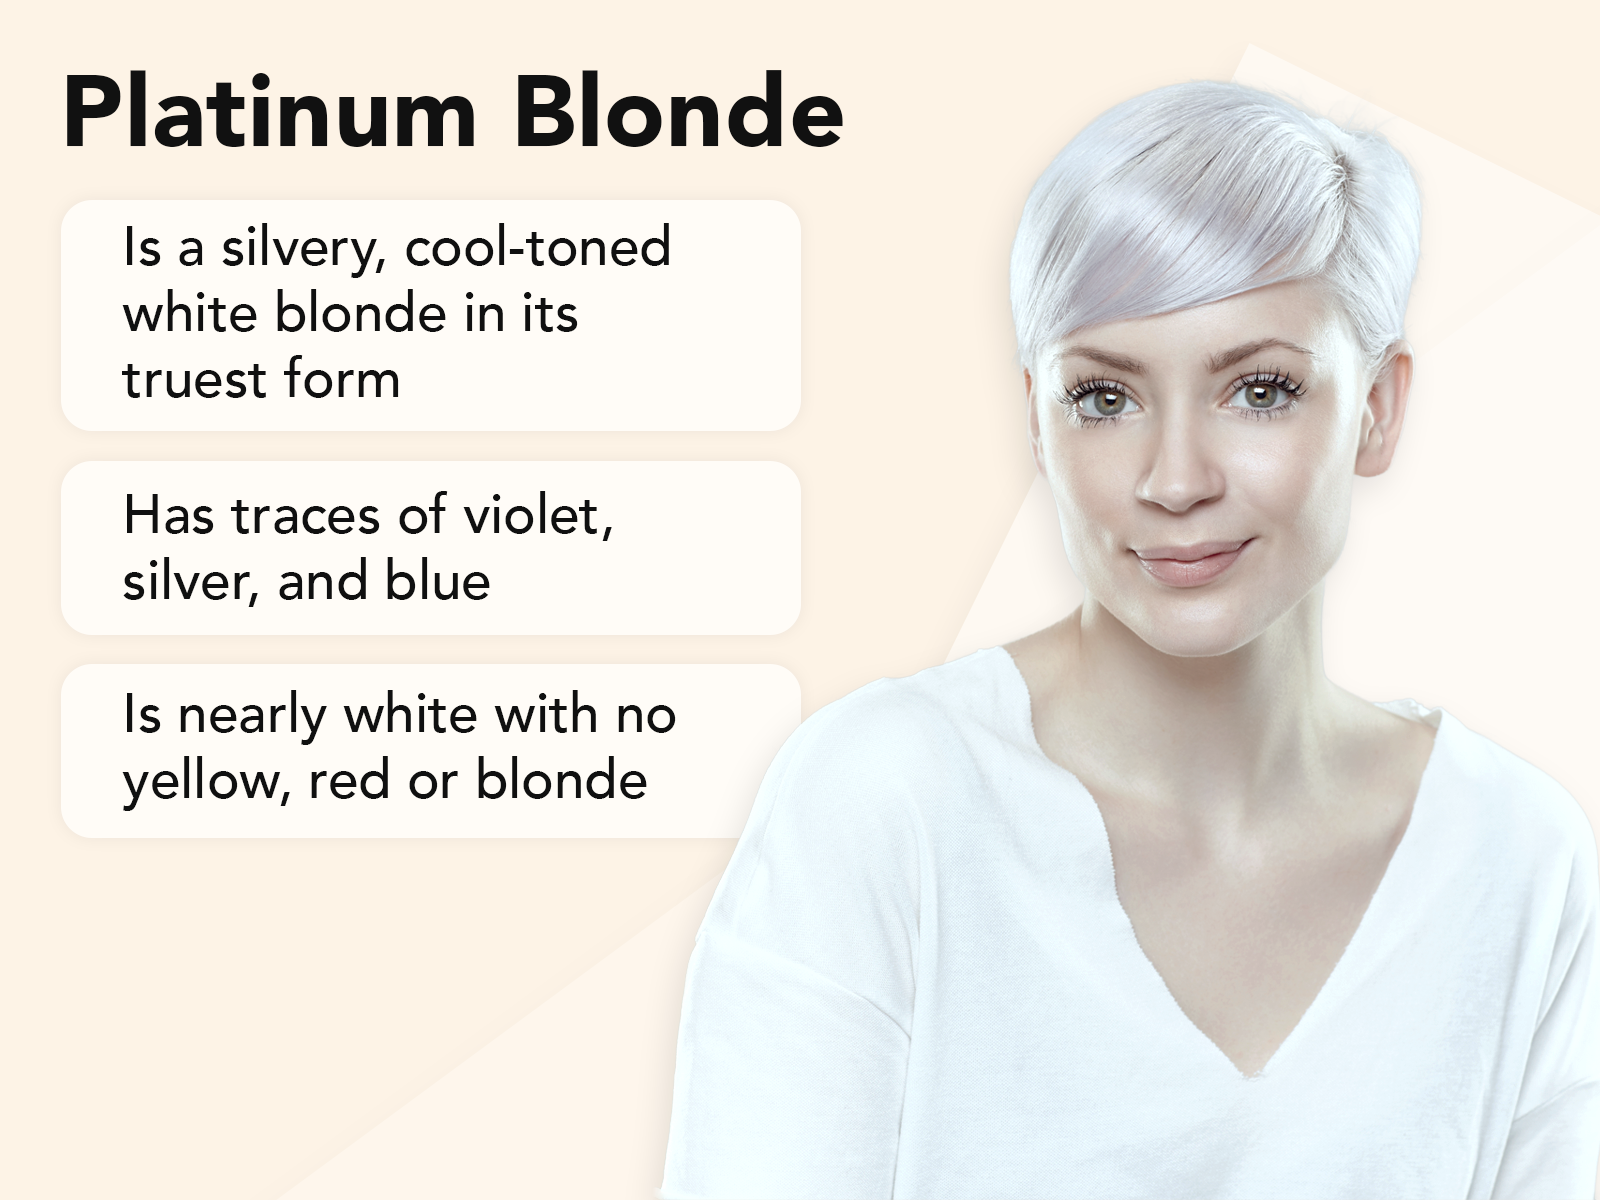 What Is Platinum Blonde Hair explainer image on a tan background